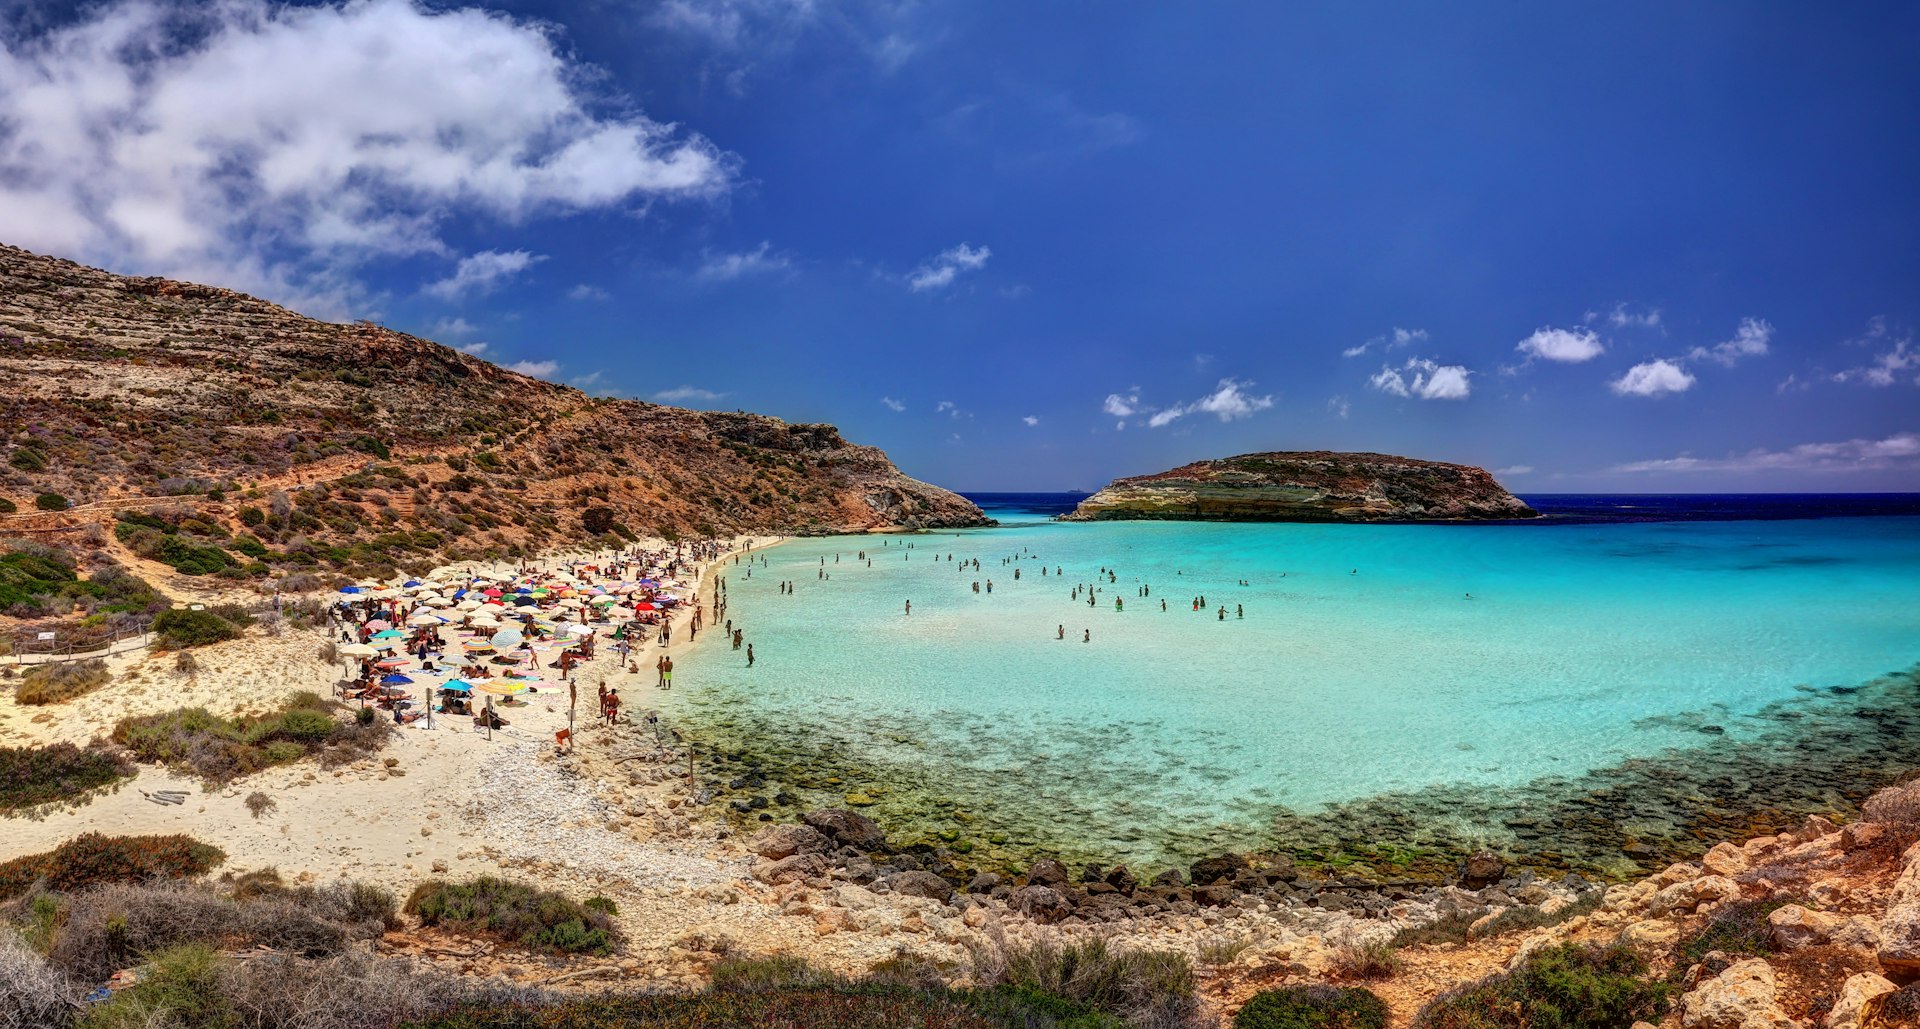 People swim in the turquoise cove at Rabbit Beach. The beach is surrounded by orange rock and there's a small island in the distance.